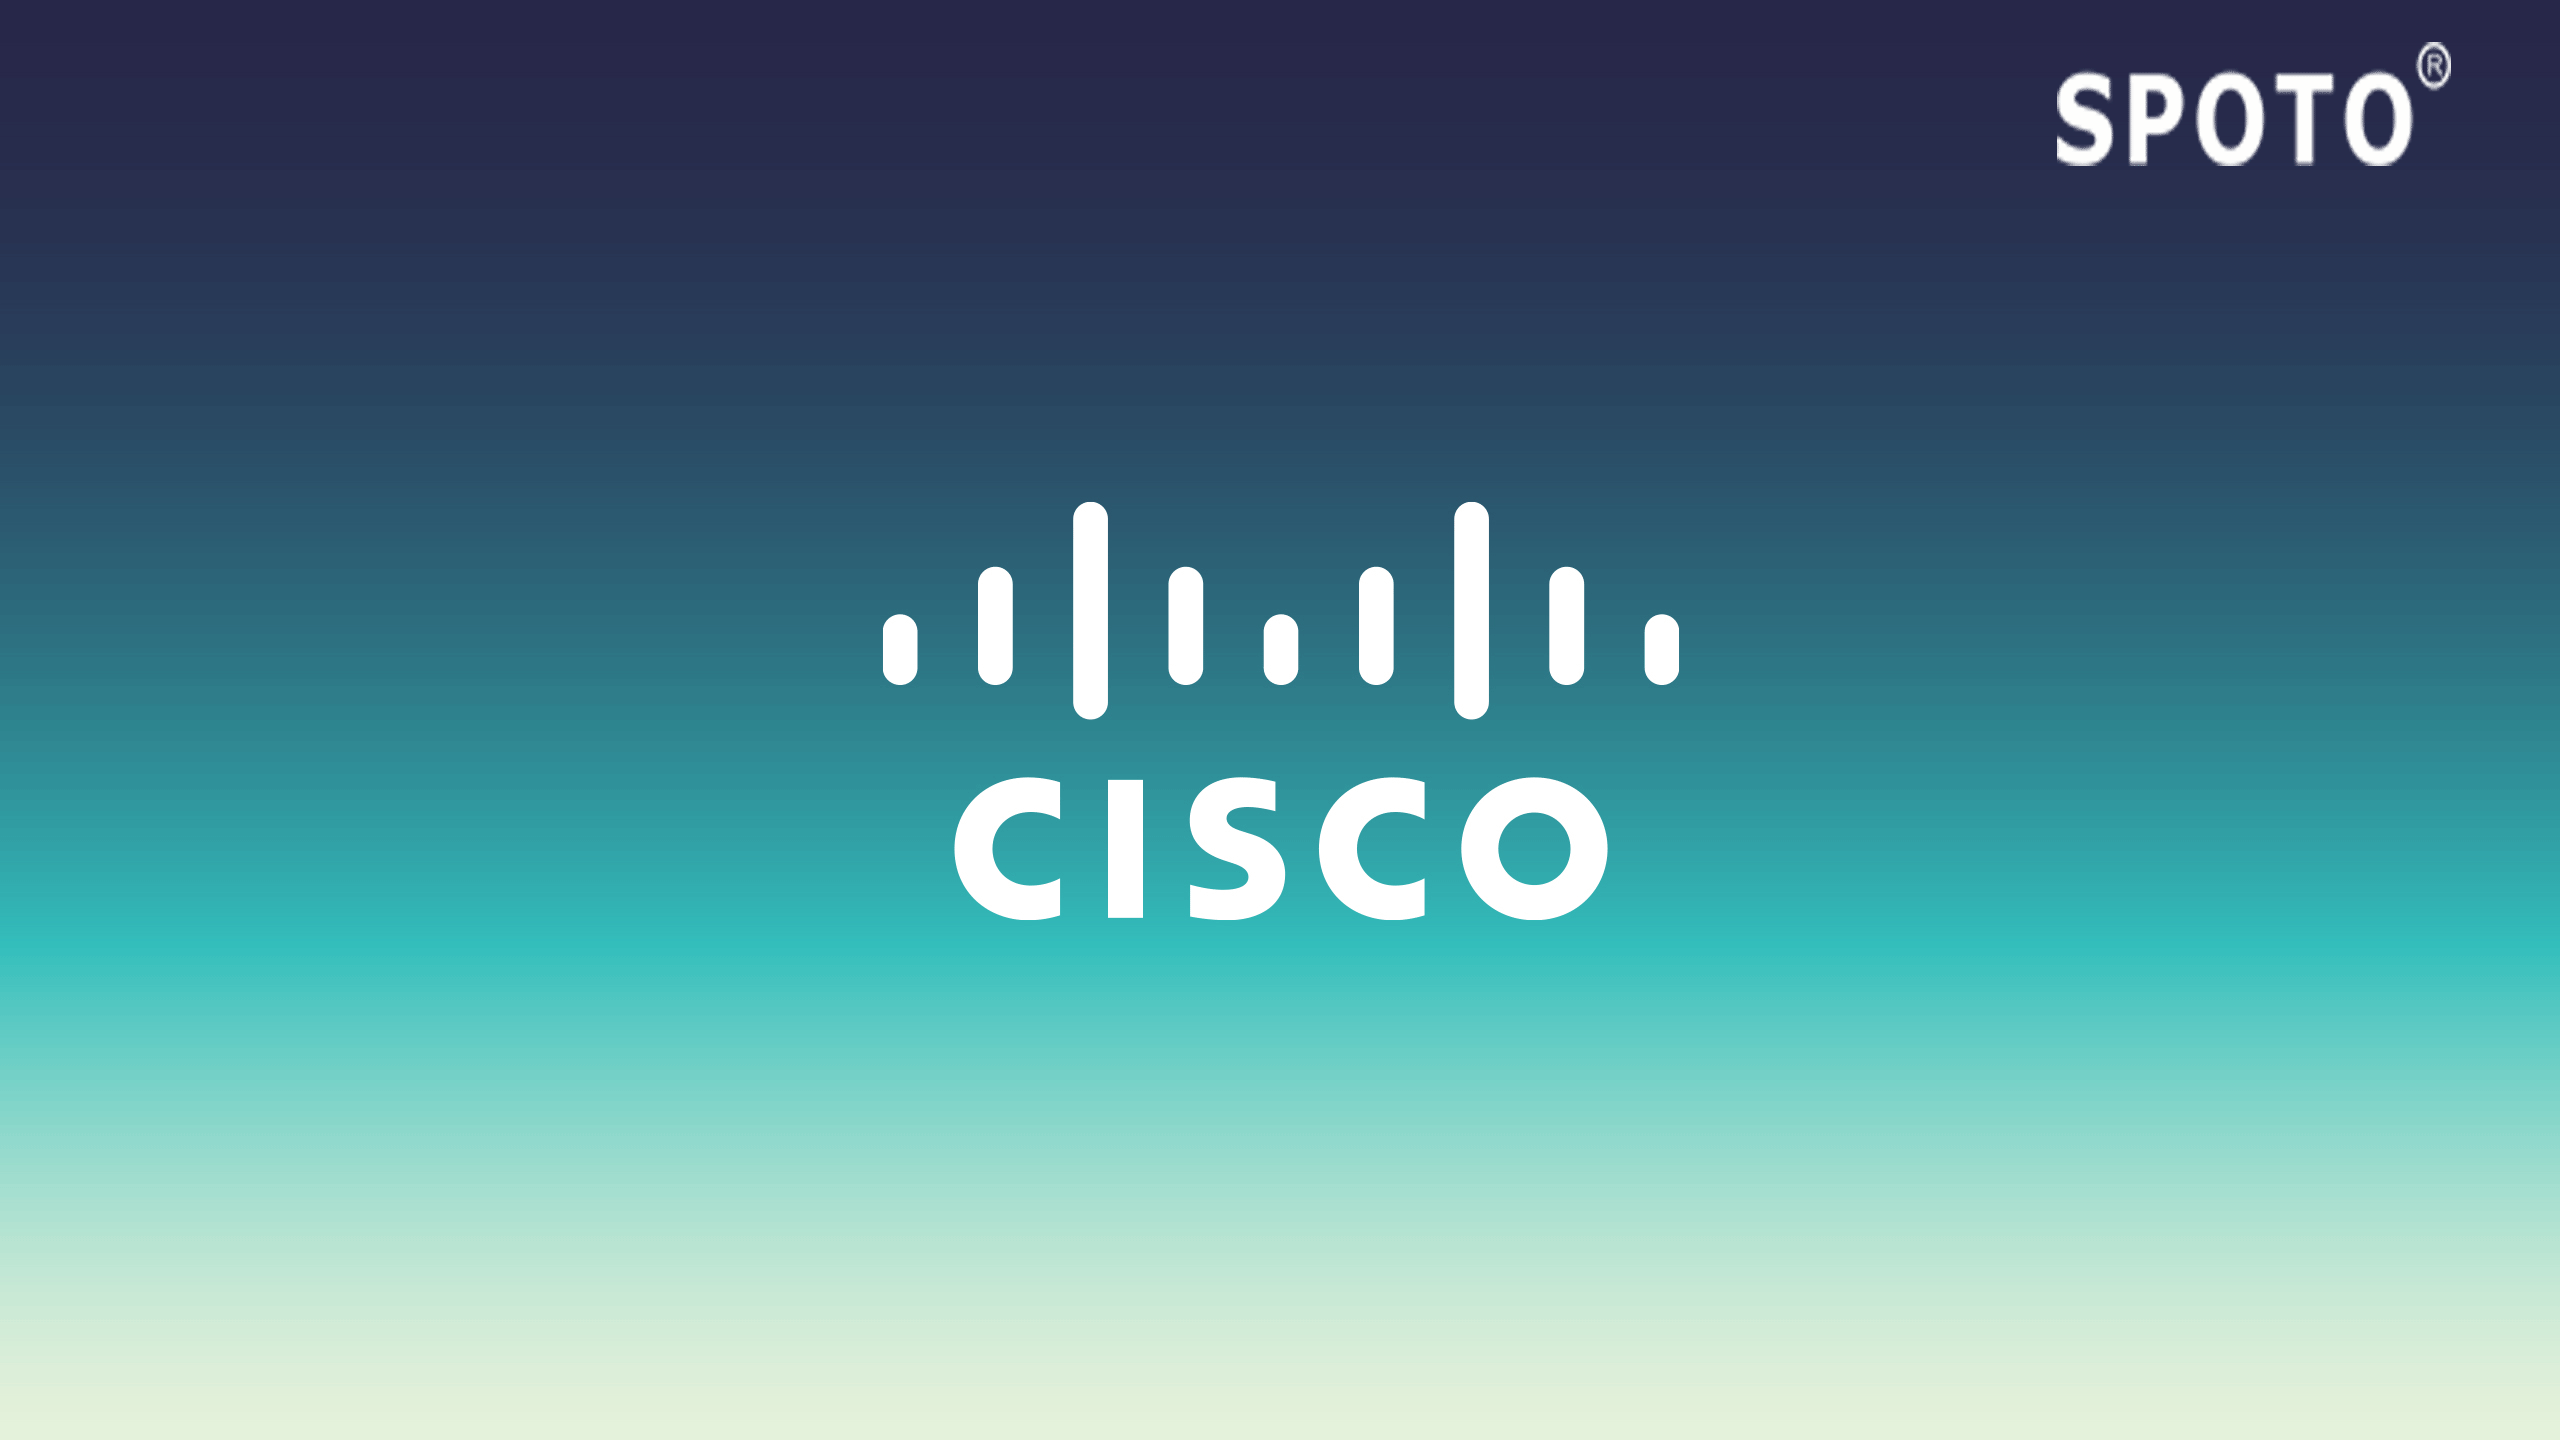 What IT Certifications Will Perfectly Pair with Cisco CCNA Data Center?